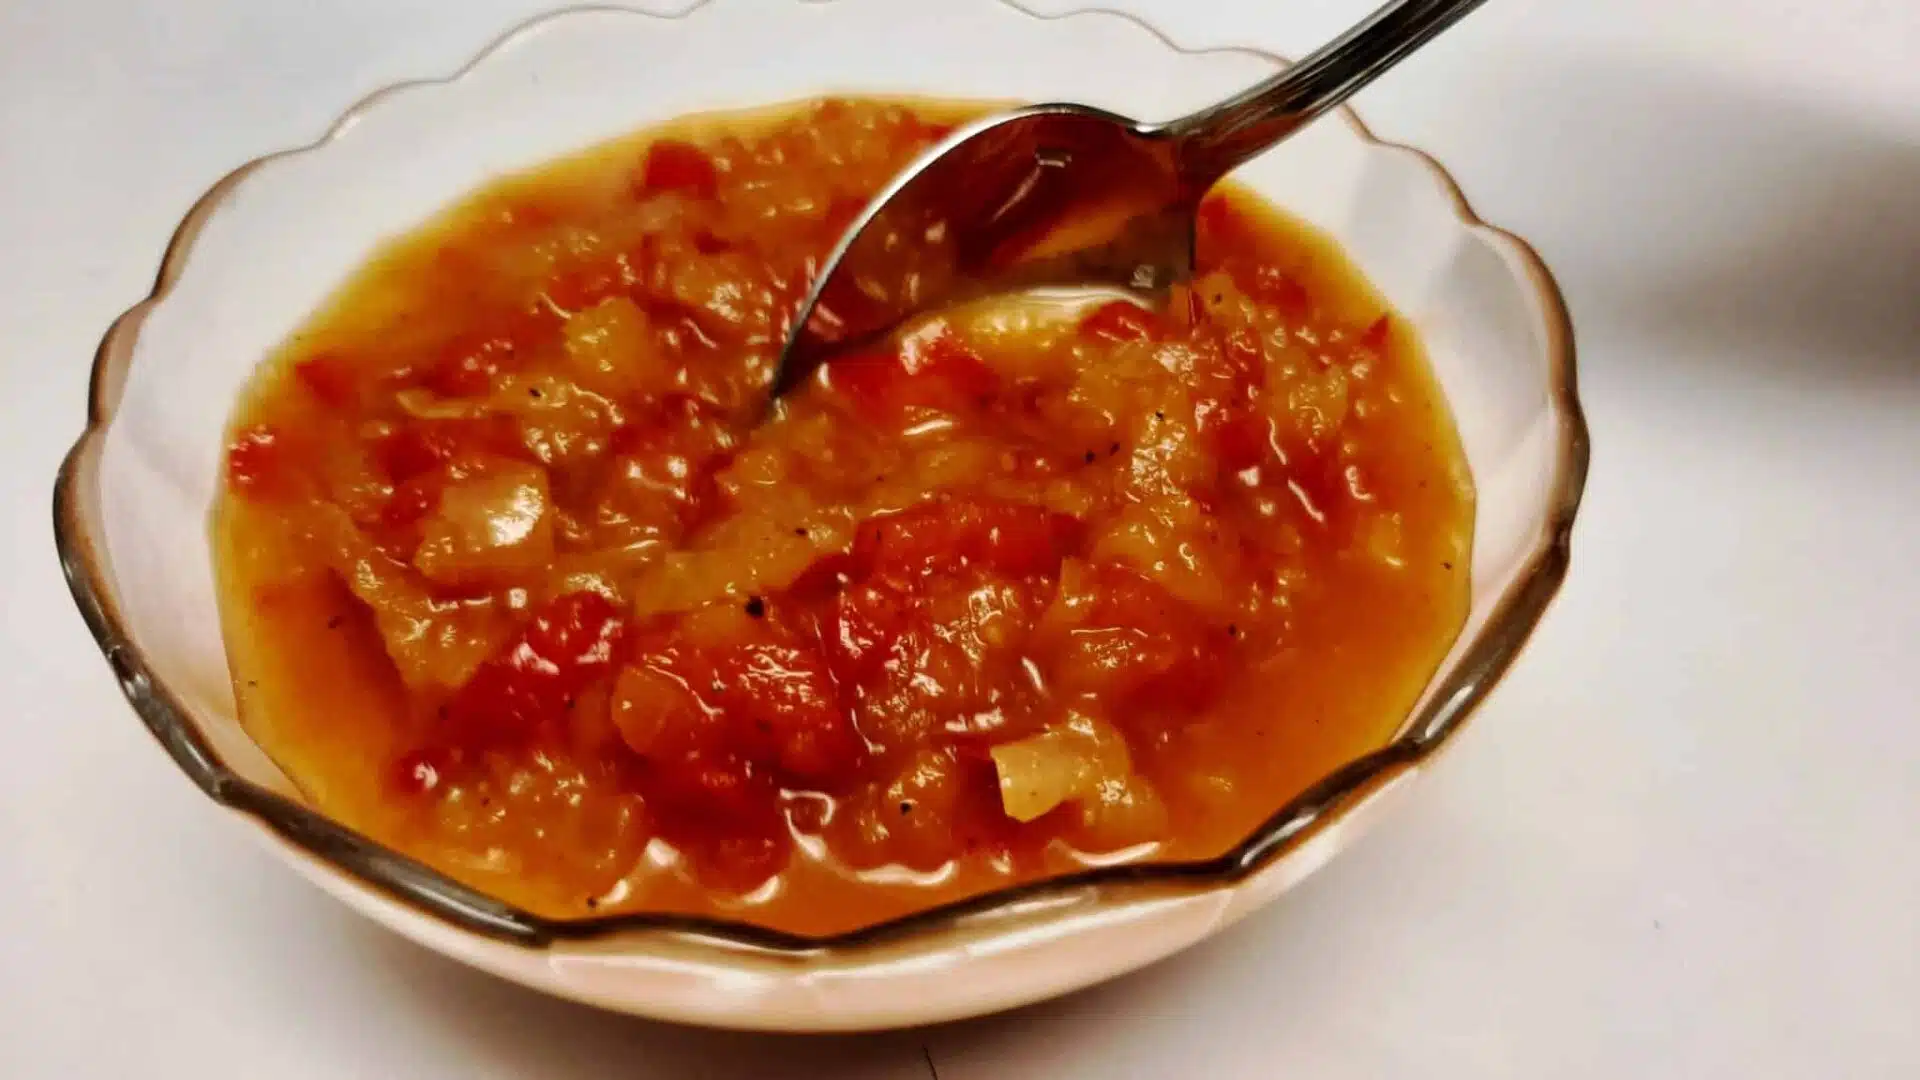 a glass bowl of sweet pepper relish with a spoon resting on the side|chef spooning pepper relish into a glass bowl